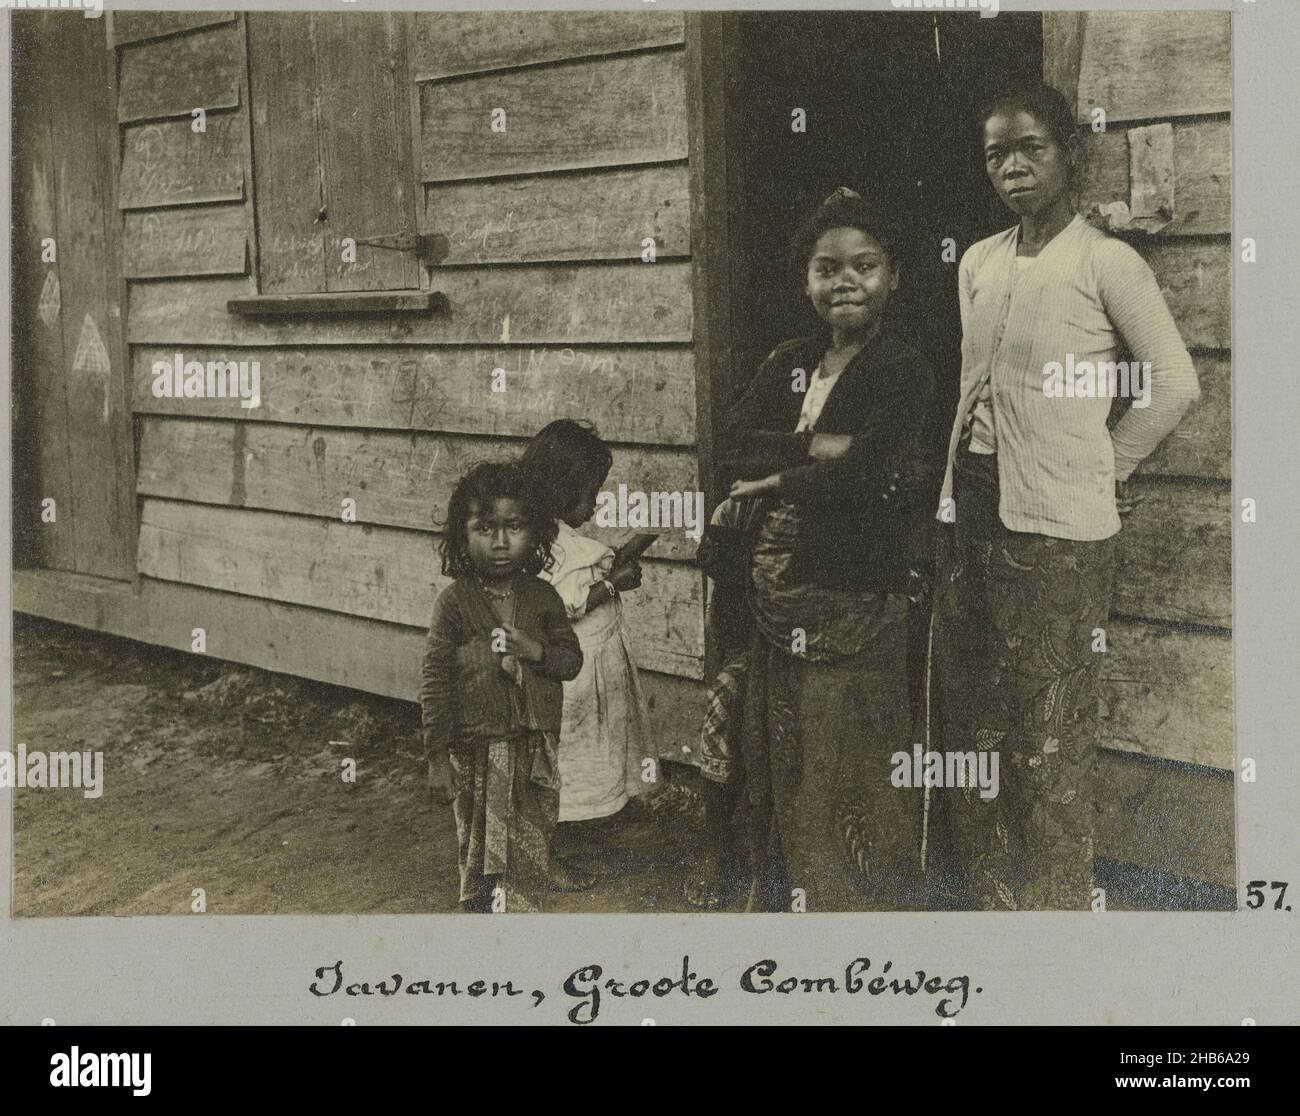 Javanese, Groote Combéweg (title on object), Two Javanese women and two girls standing in the doorway of a wooden house on the Grote Combéweg in Paramaribo. Part of the photo album Souvenir de Voyage (part 2), about the life of the Doijer family in and around the plantation Ma Retraite in Suriname in the years 1906-1913., Hendrik Doijer (attributed to), Suriname, 1906 - 1913, photographic support, gelatin silver print, height 82 mm × width 111 mm Stock Photo